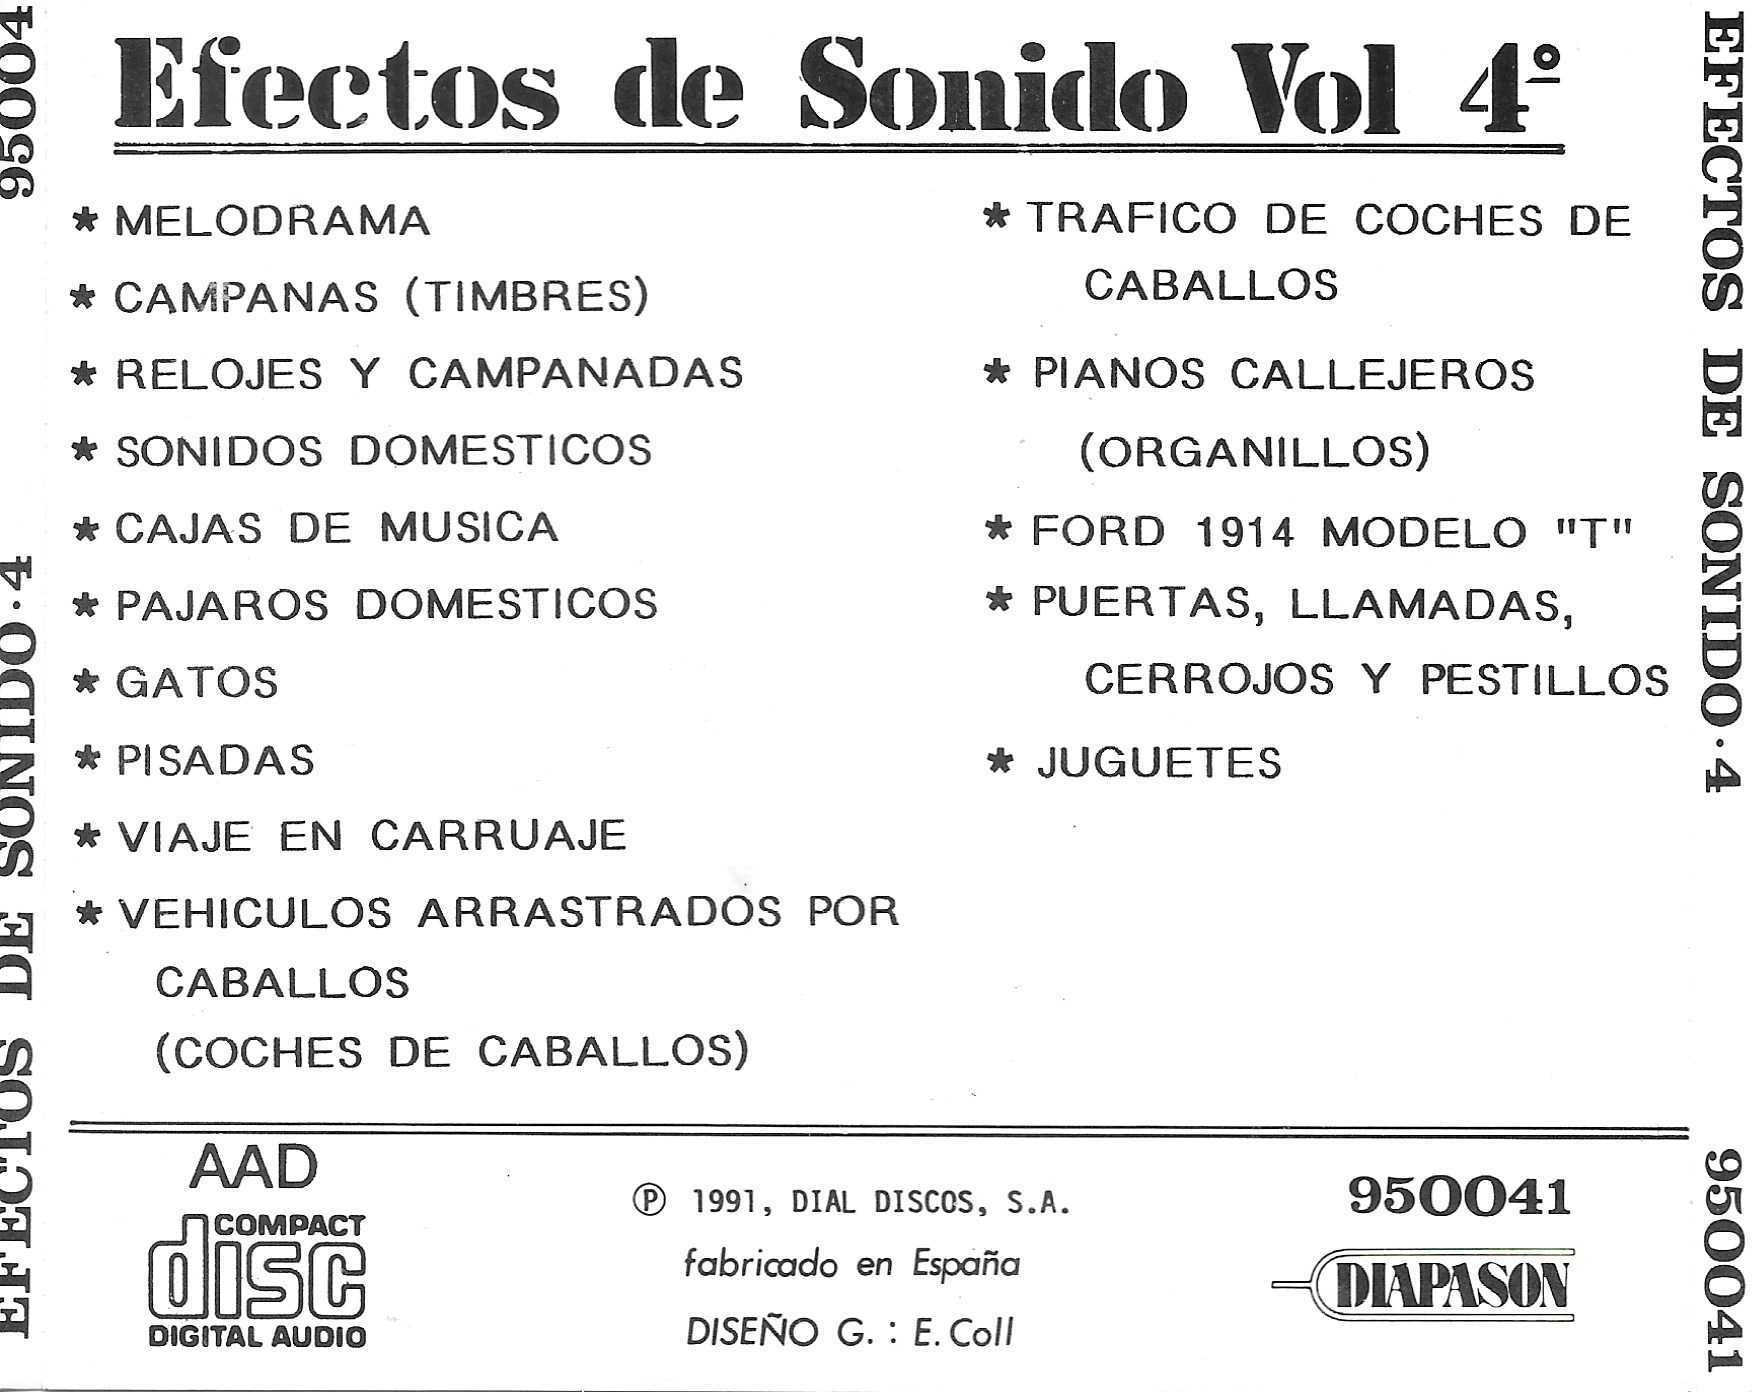 Picture of 95 0041 Effectos de sonido - Volume 4 by artist Various from the BBC records and Tapes library